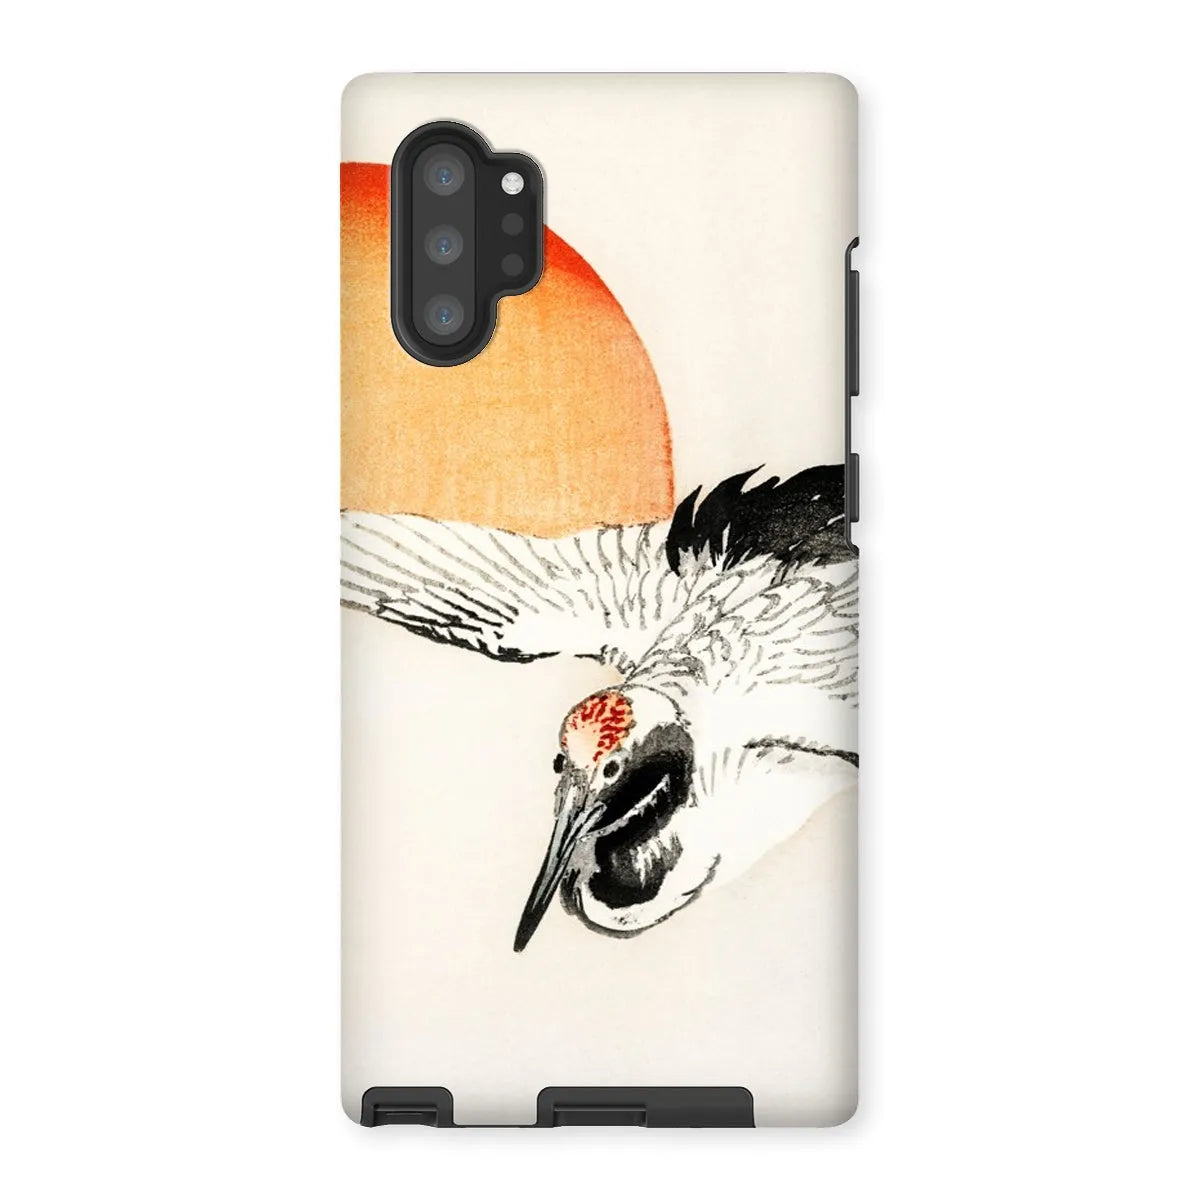 Flying Crane Japanese Aesthetic Phone Case - Kōno Bairei - Samsung Galaxy Note 10p / Matte - Mobile Phone Cases